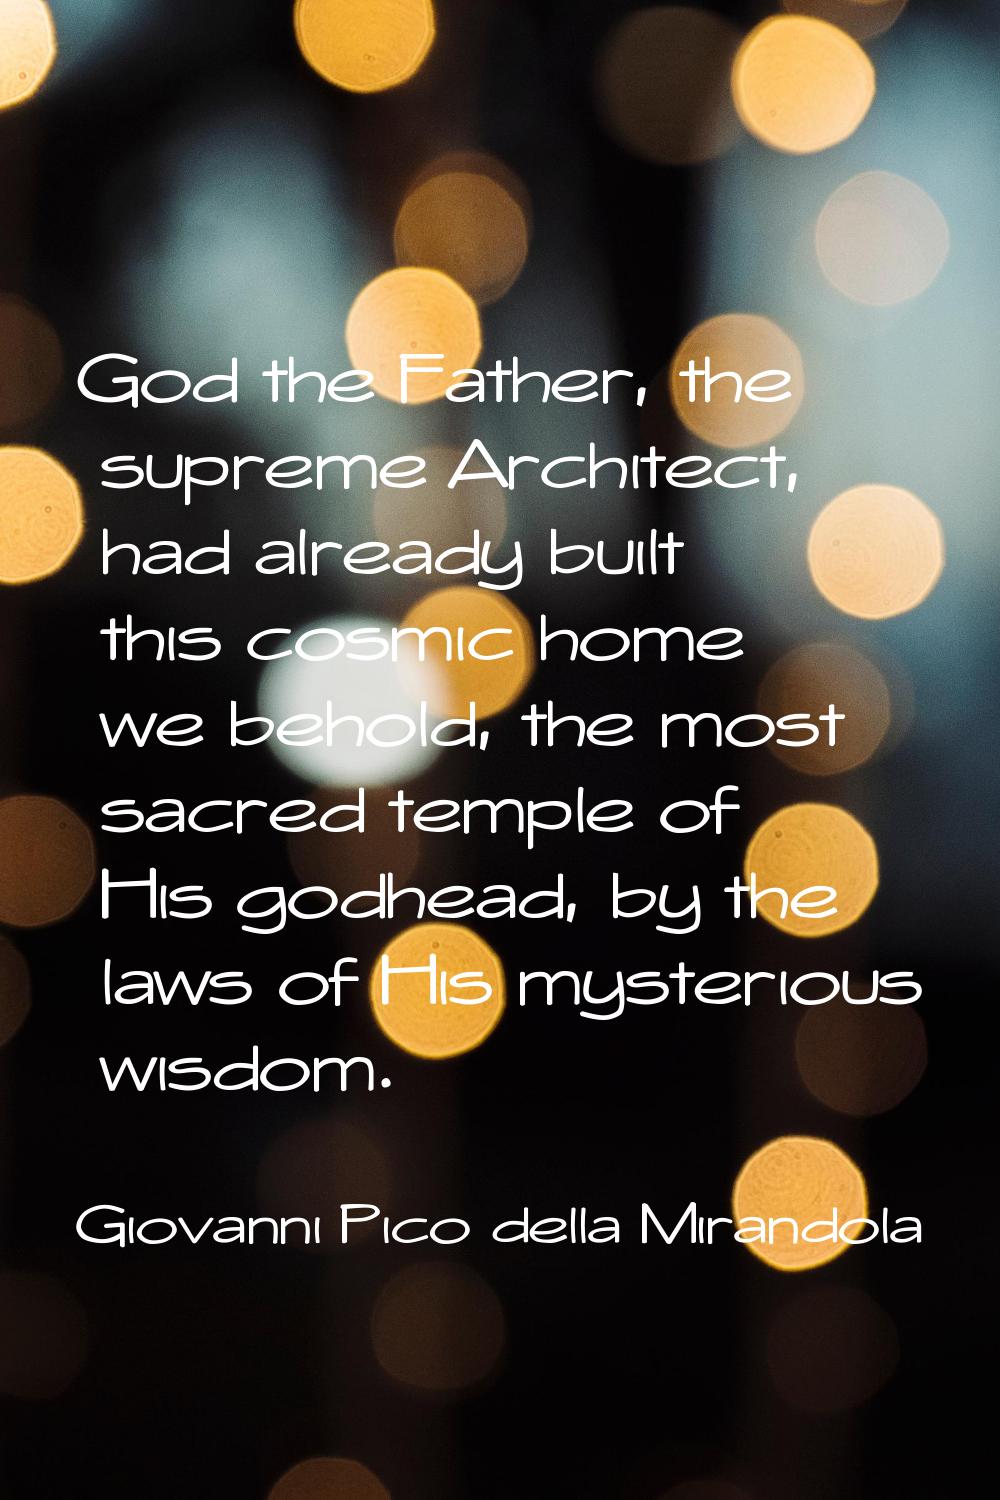 God the Father, the supreme Architect, had already built this cosmic home we behold, the most sacre